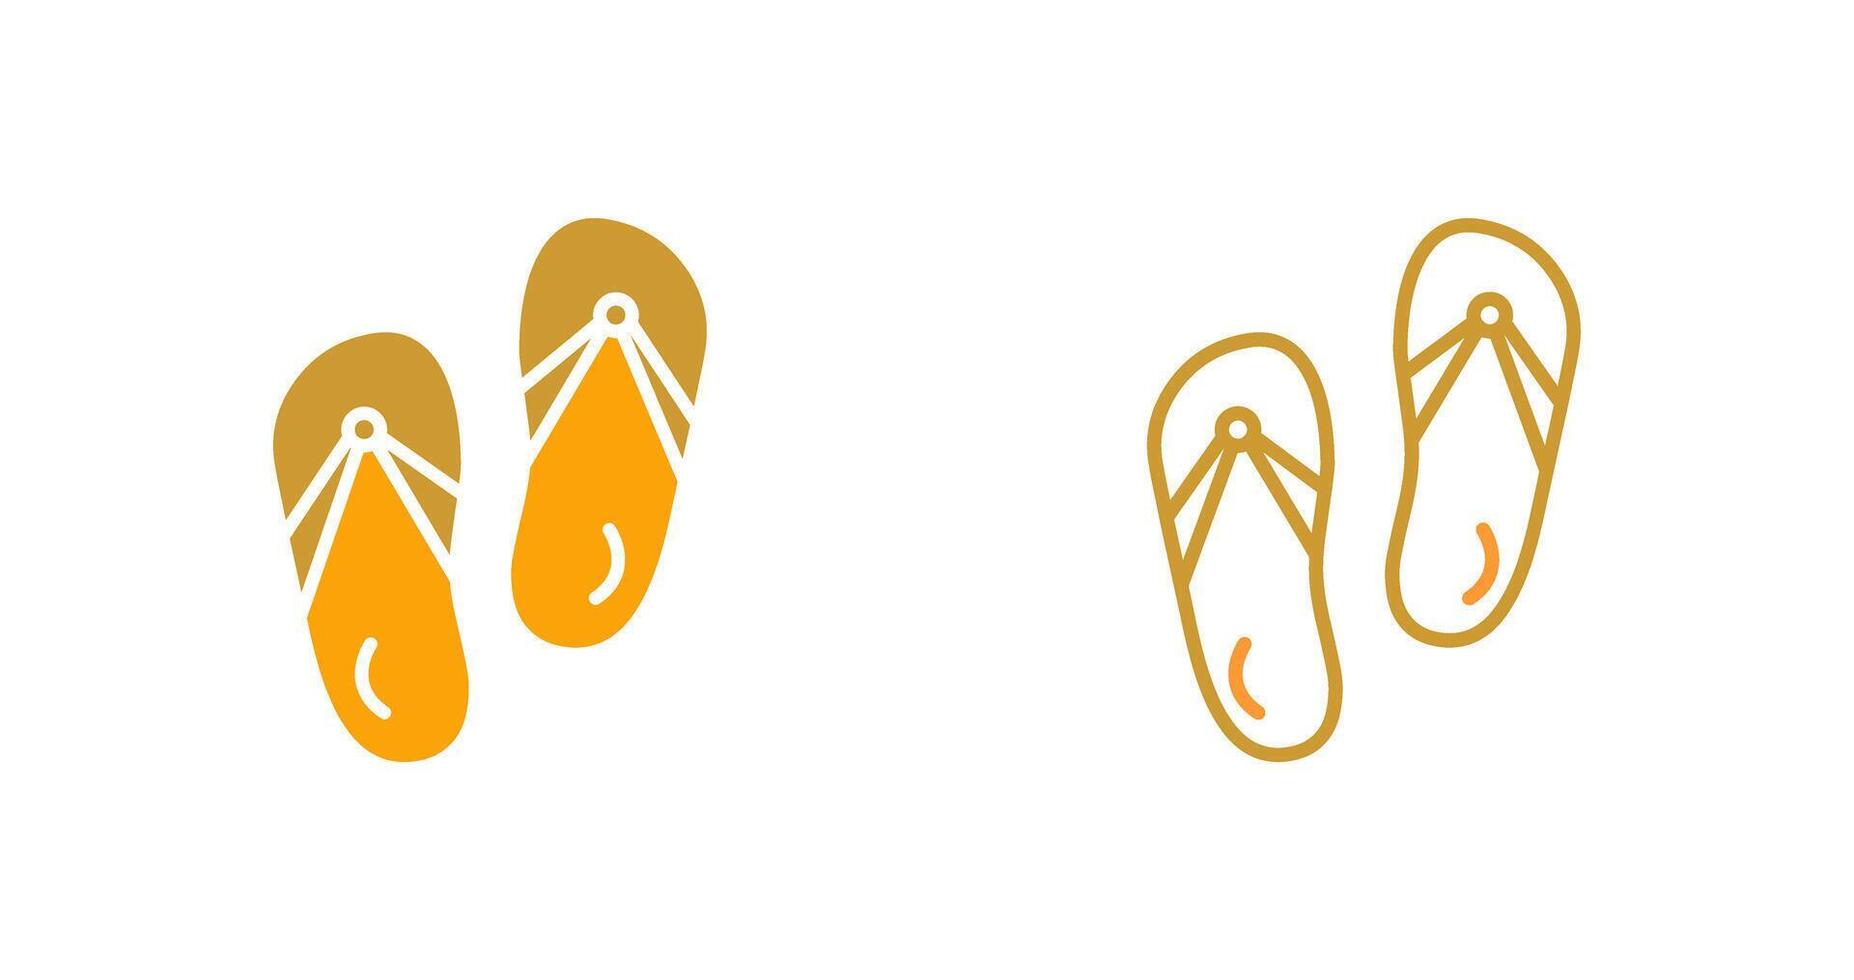 Slippers Vector Icon